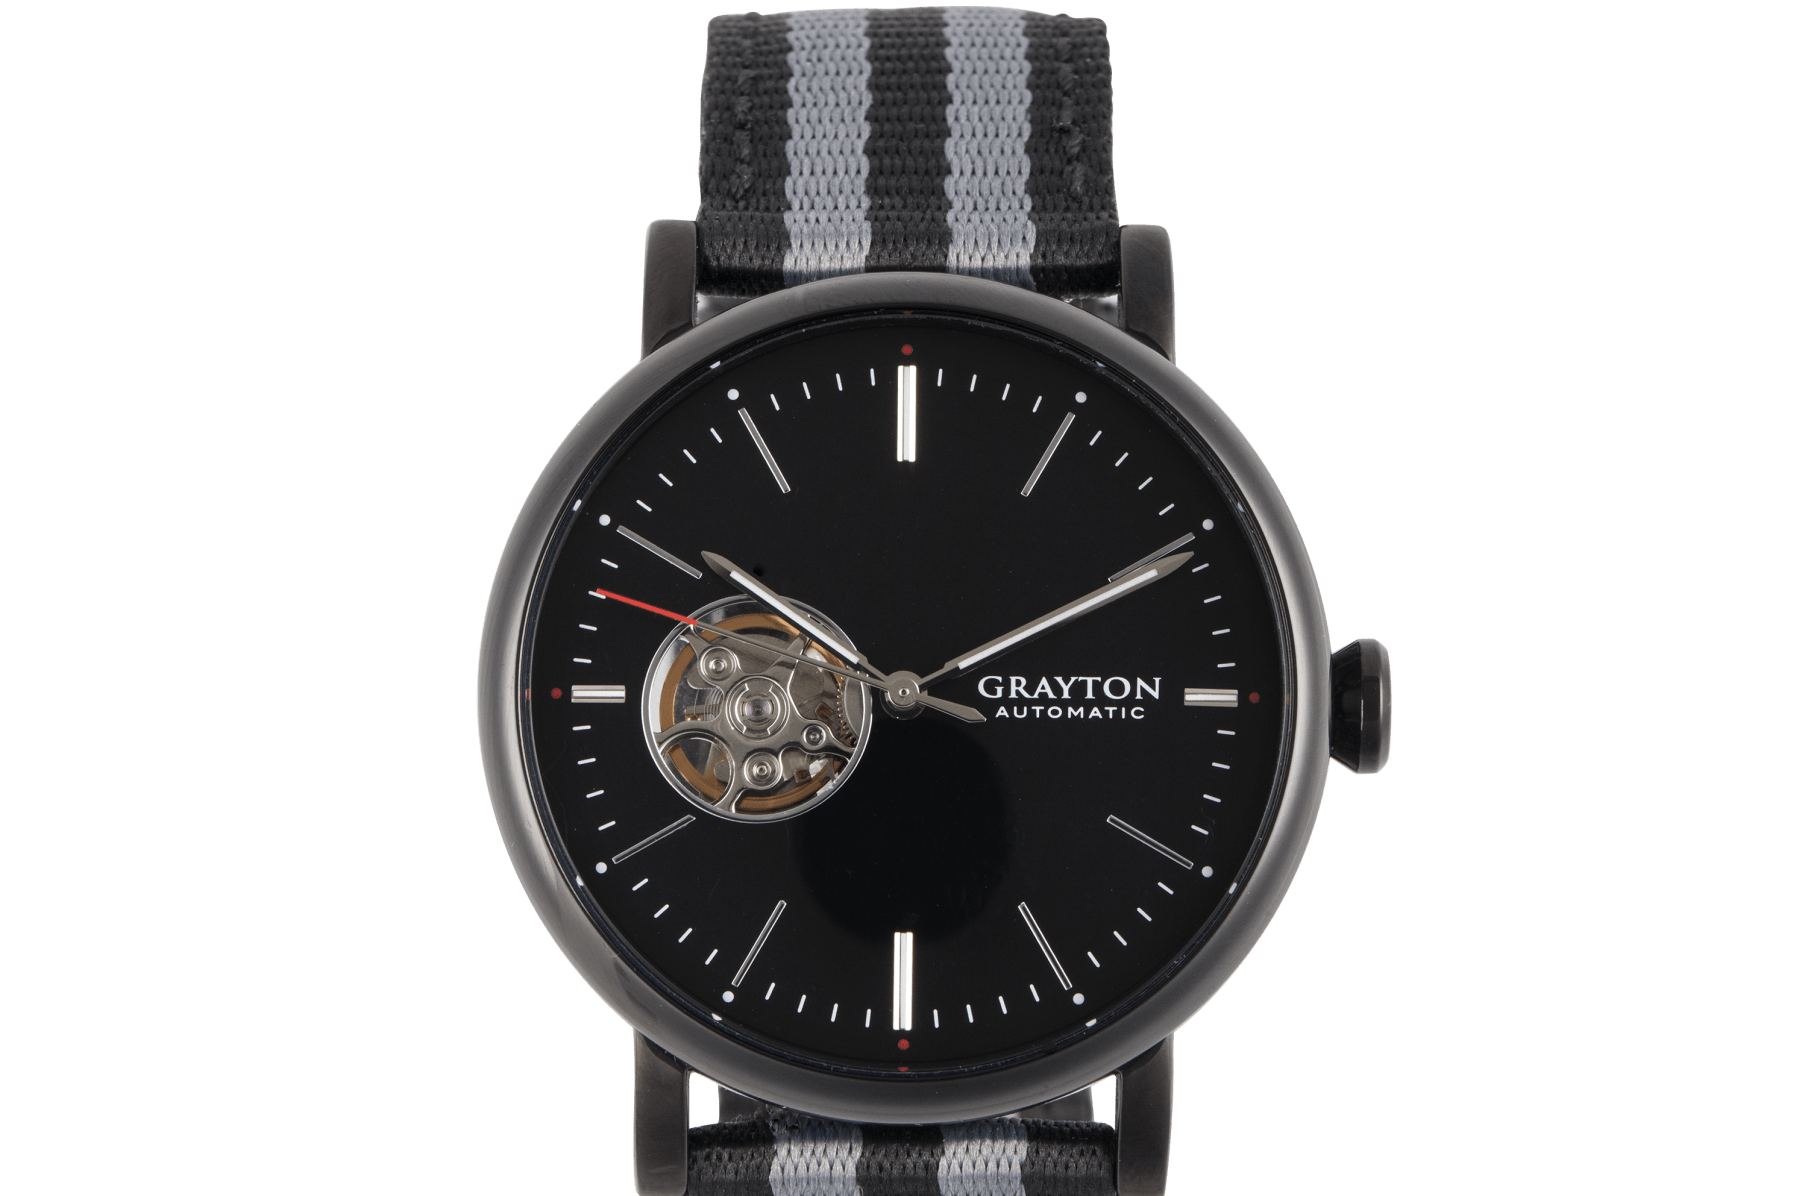 Common Watch Terms You Should Know [Part 1] – Grayton